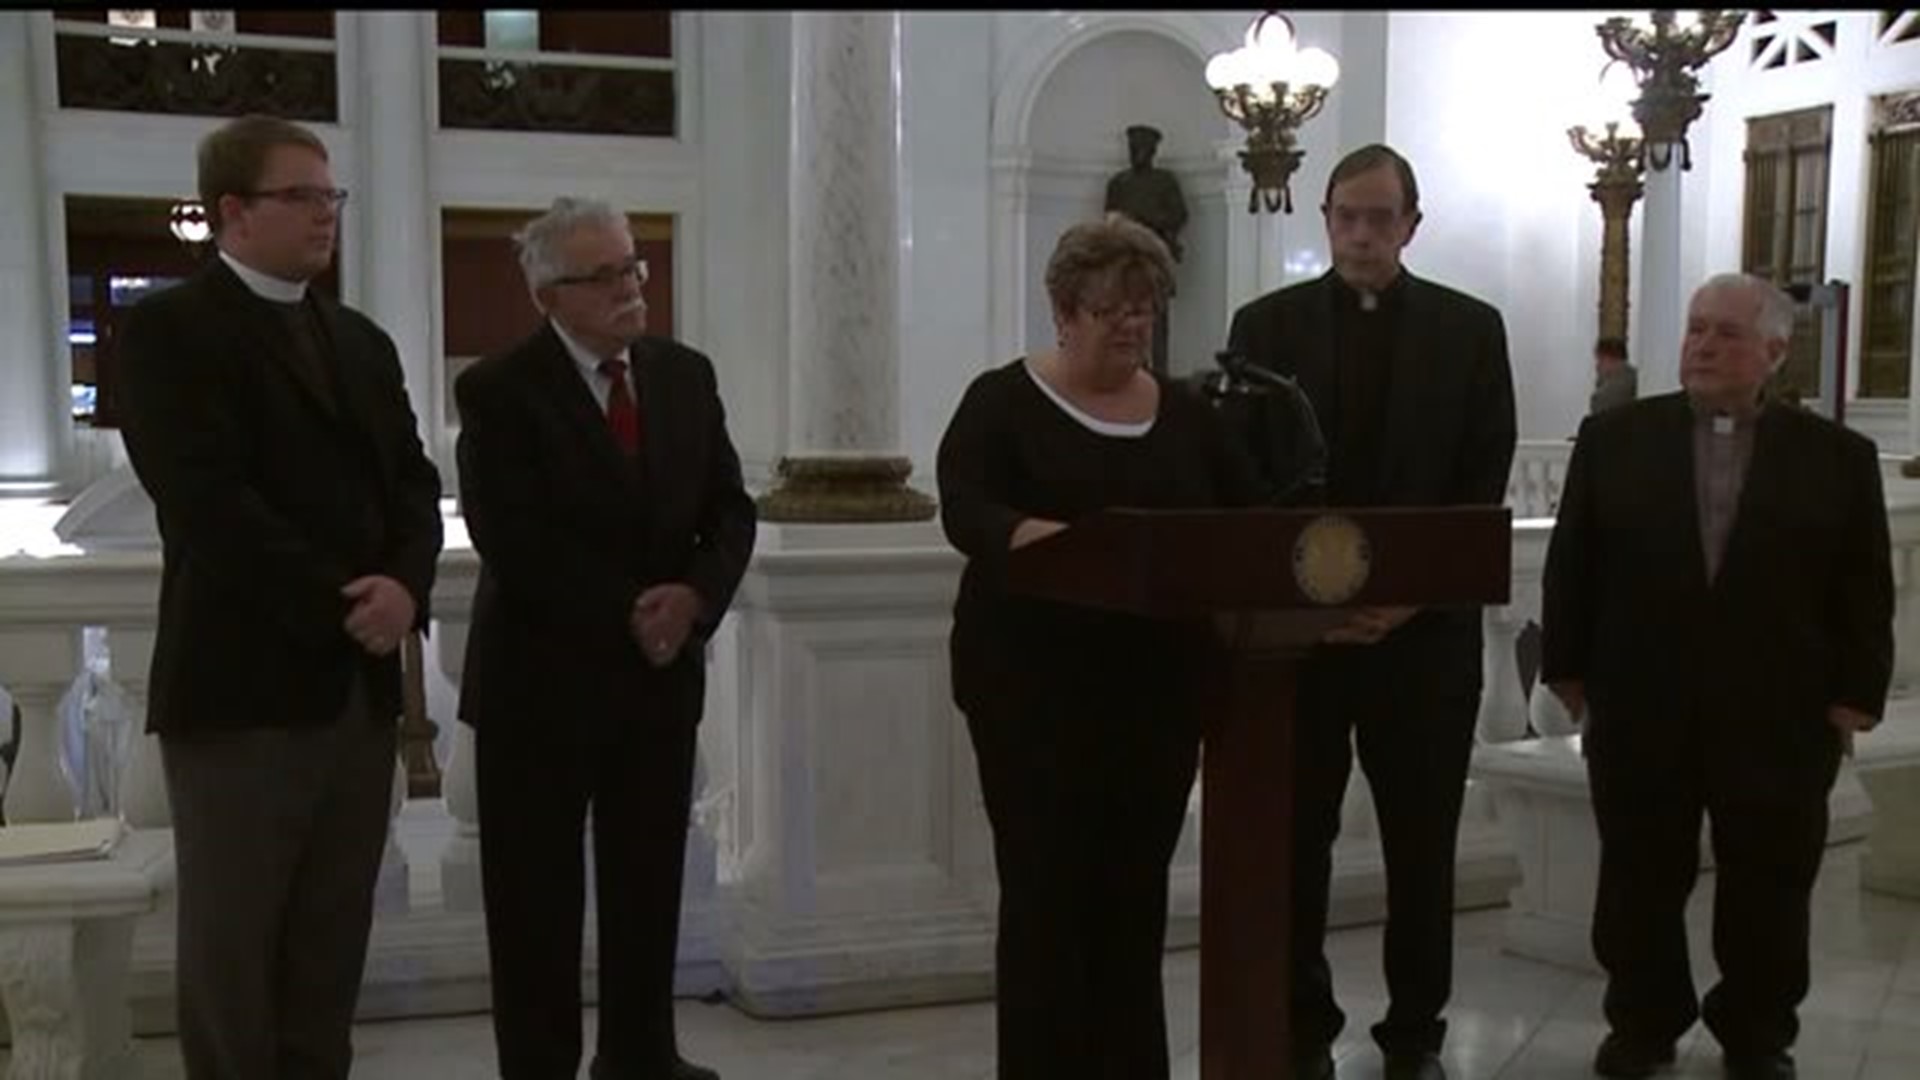 Religious leaders show support for Medical Marijuana in Harrisburg